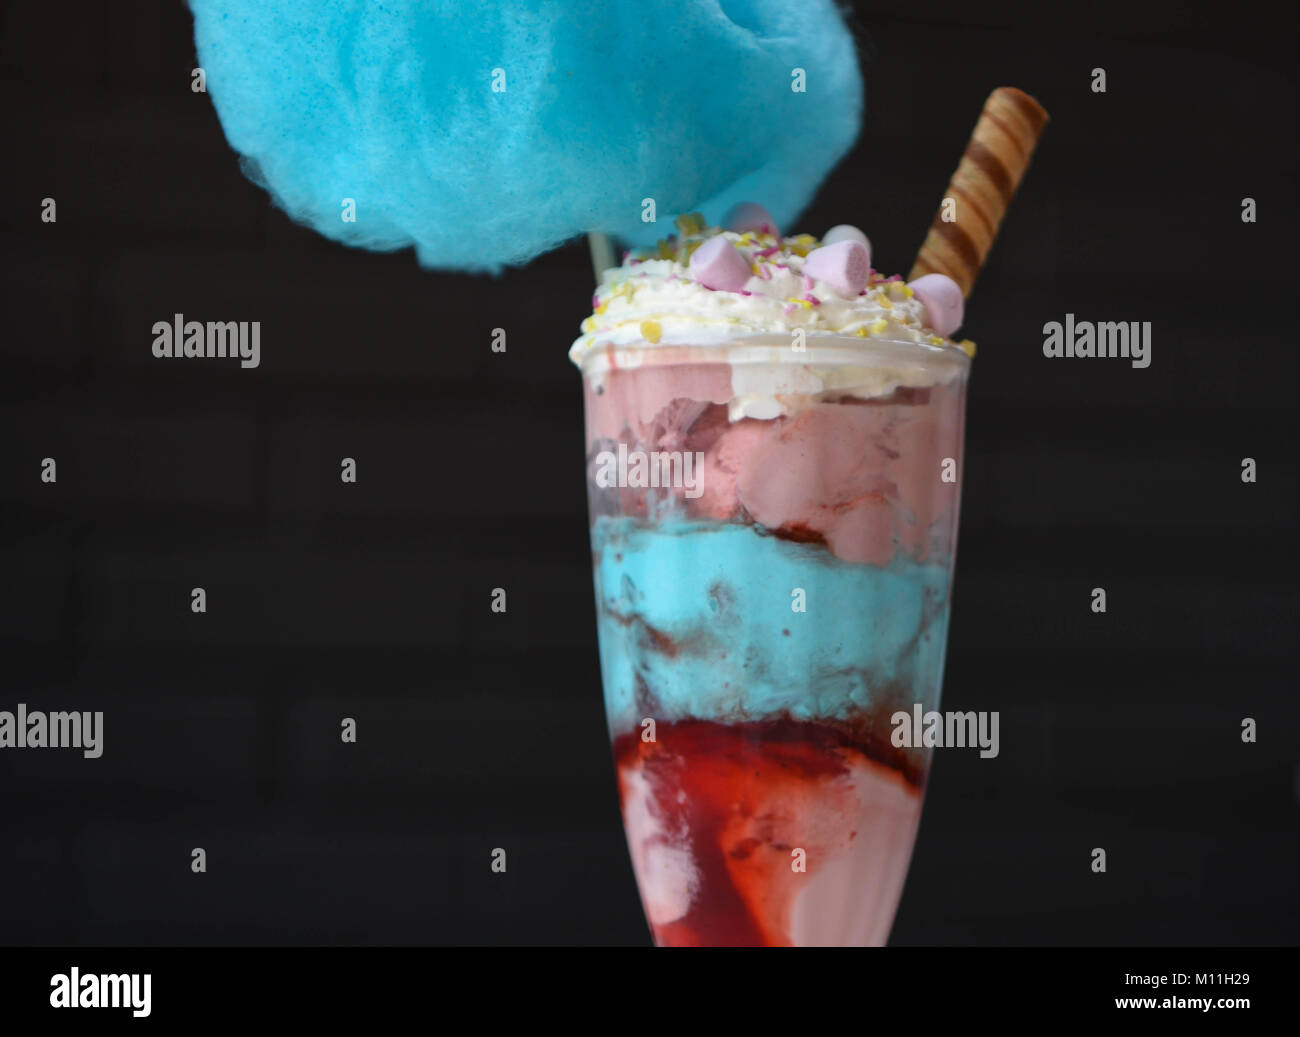 colorful food photography of a blue and pink ice cream sundae with strawberry and bubblegum flavored ice cream candy floss and on a black background Stock Photo